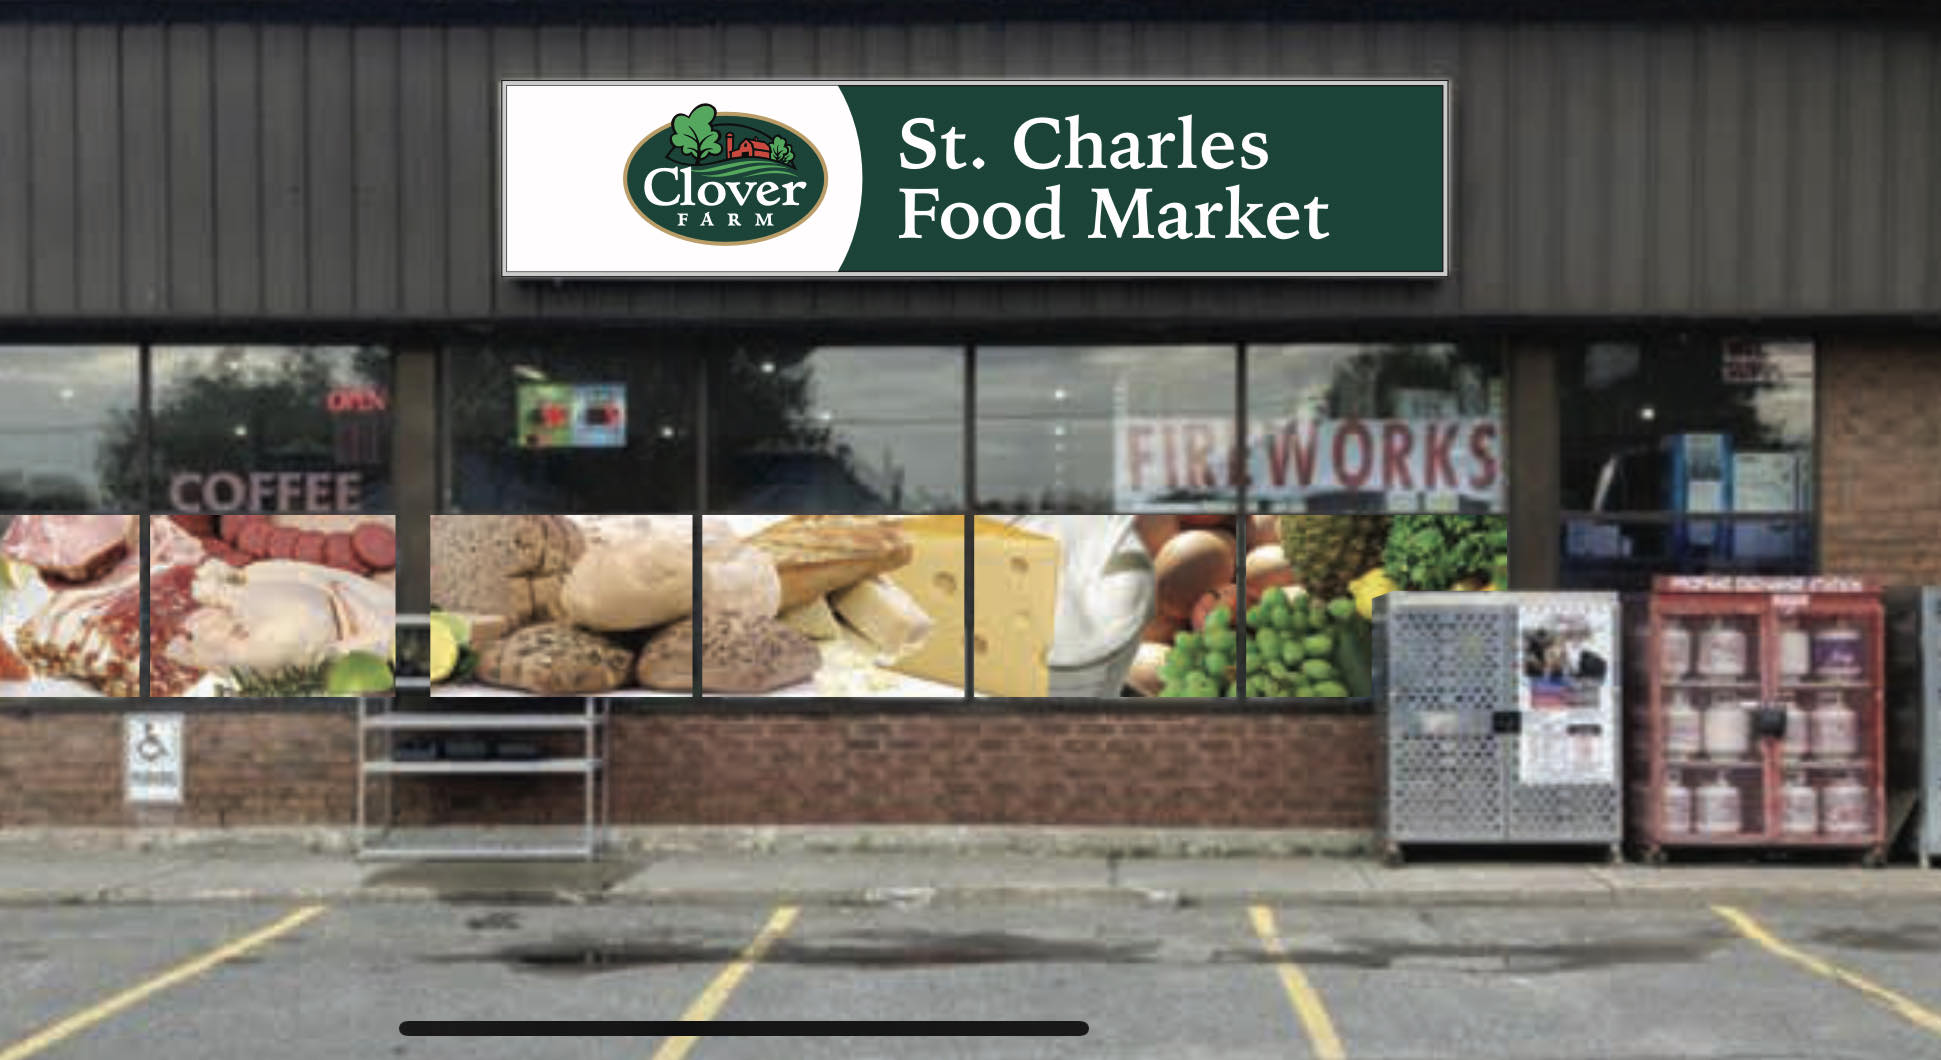 Find our rabbit in the deli section of the St. Charles Food Market